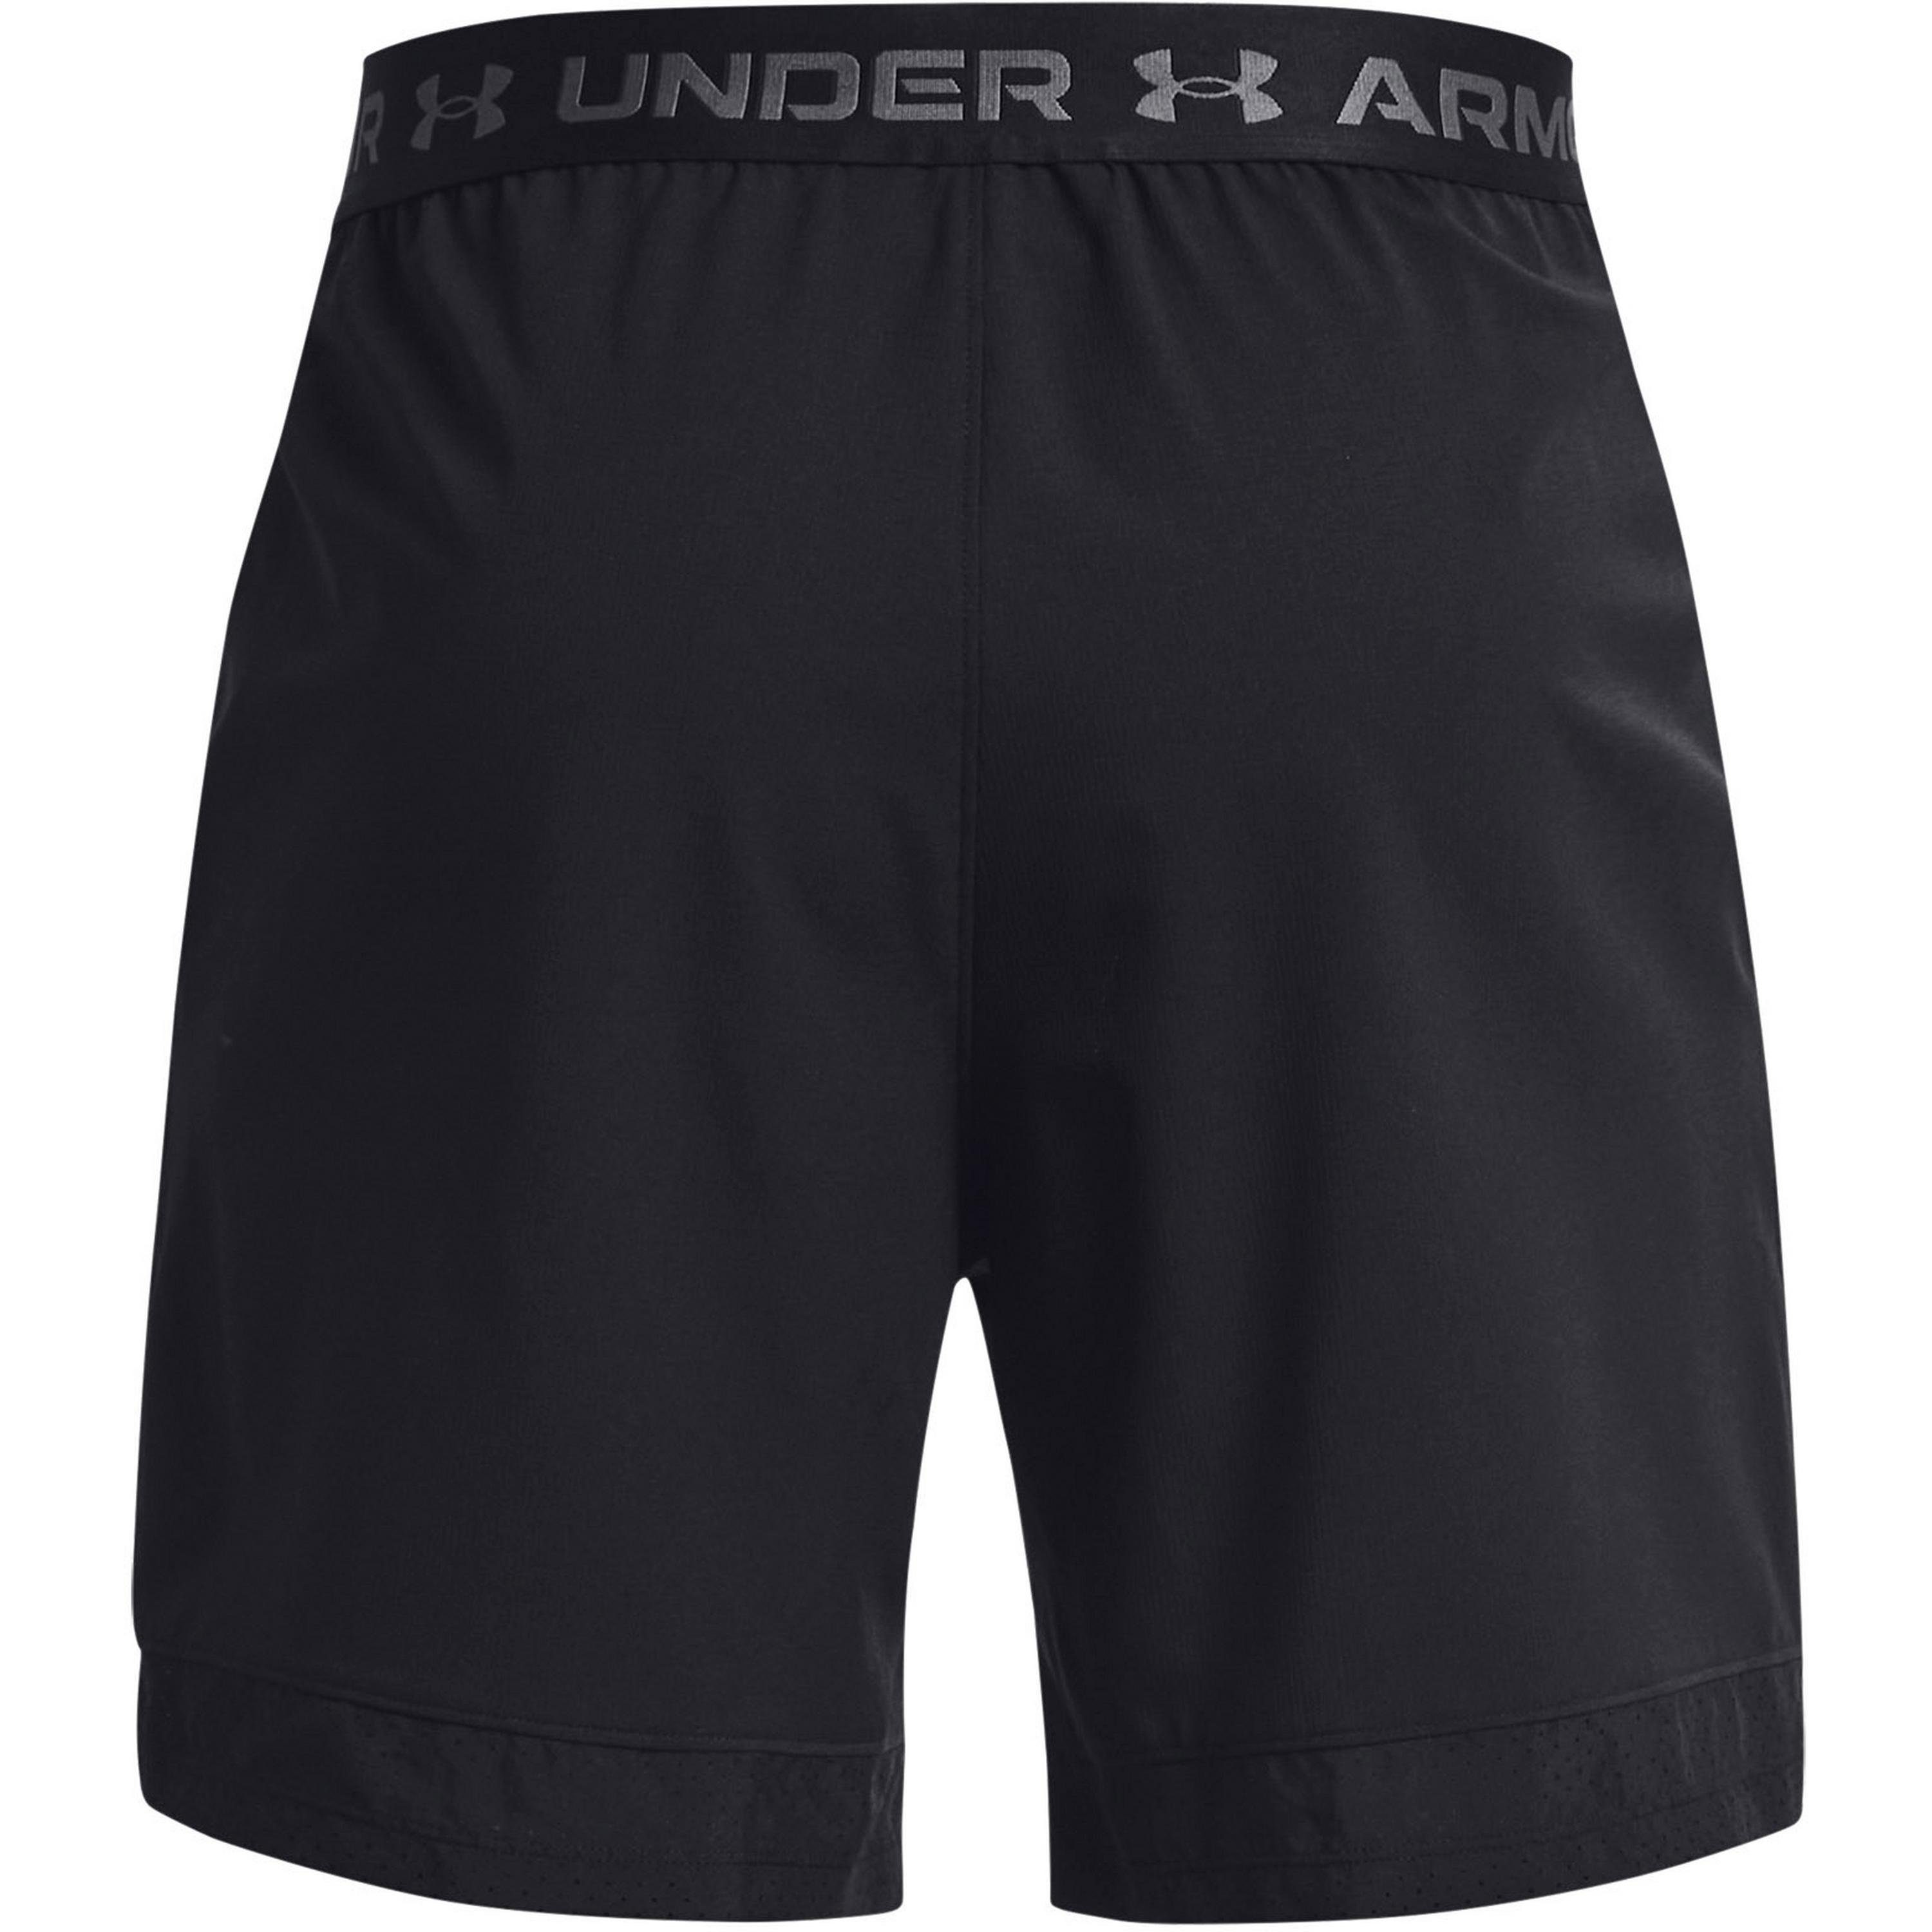 Funktionsshorts Under gray Vanish black-pitch Armour®